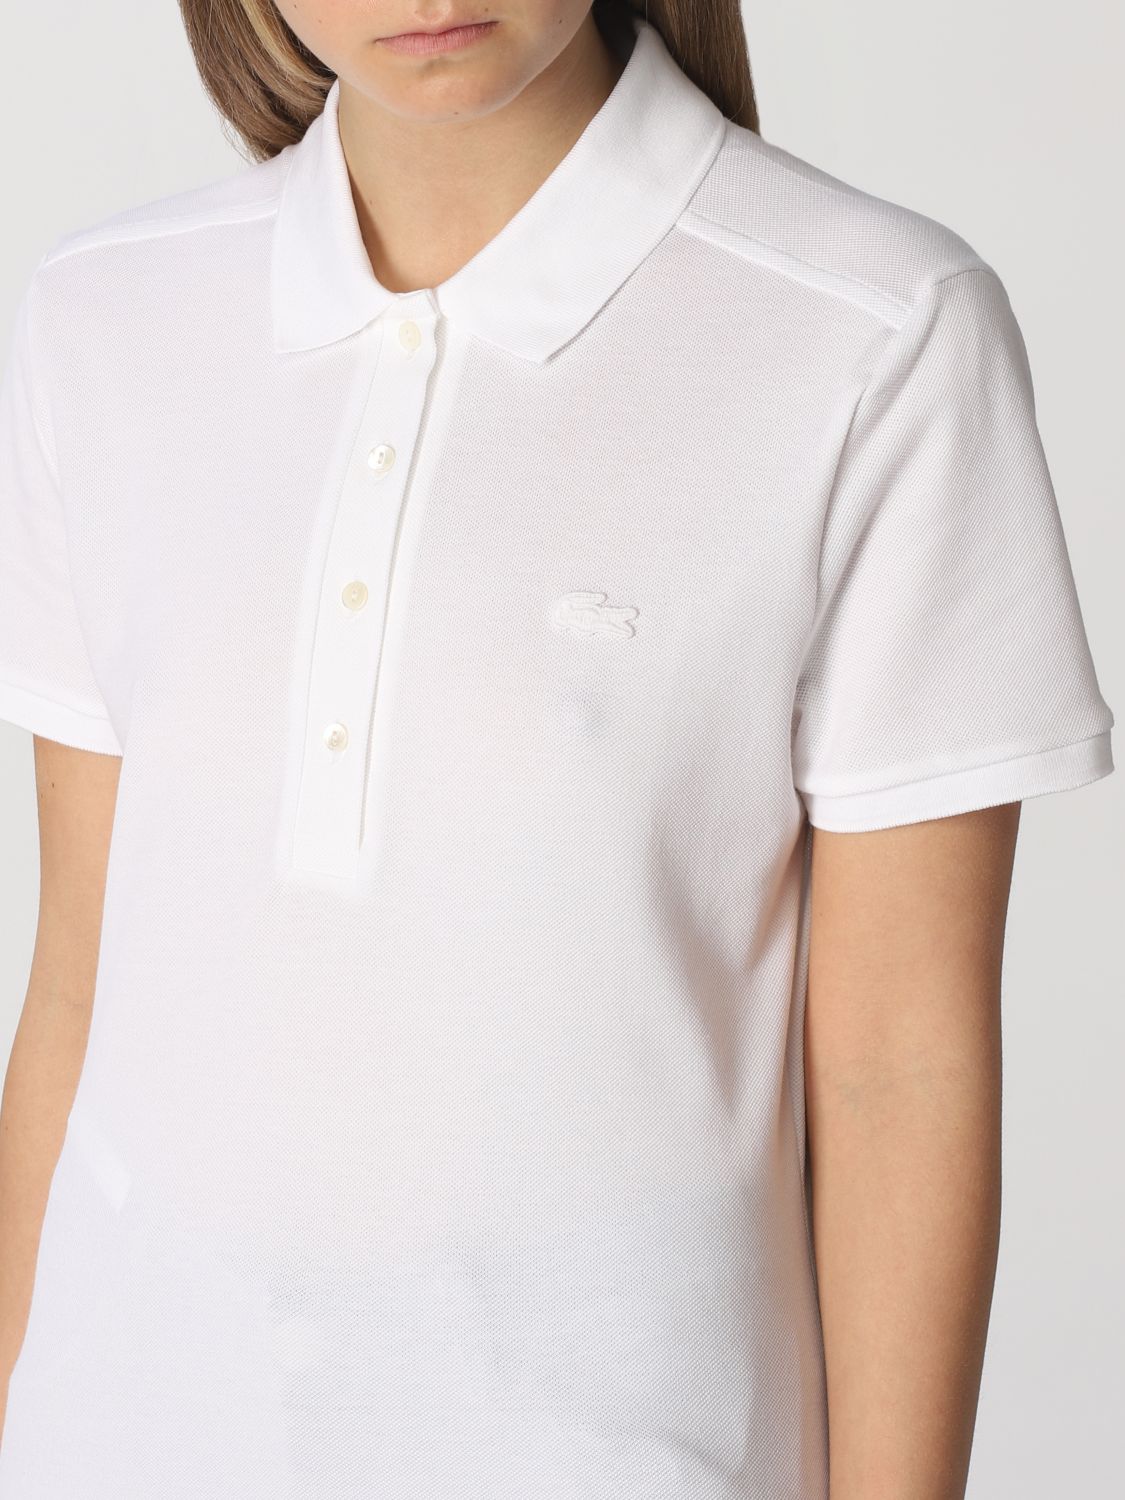 Lacoste Outlet: Polo Shirt For Woman White Lacoste Polo, 51% OFF